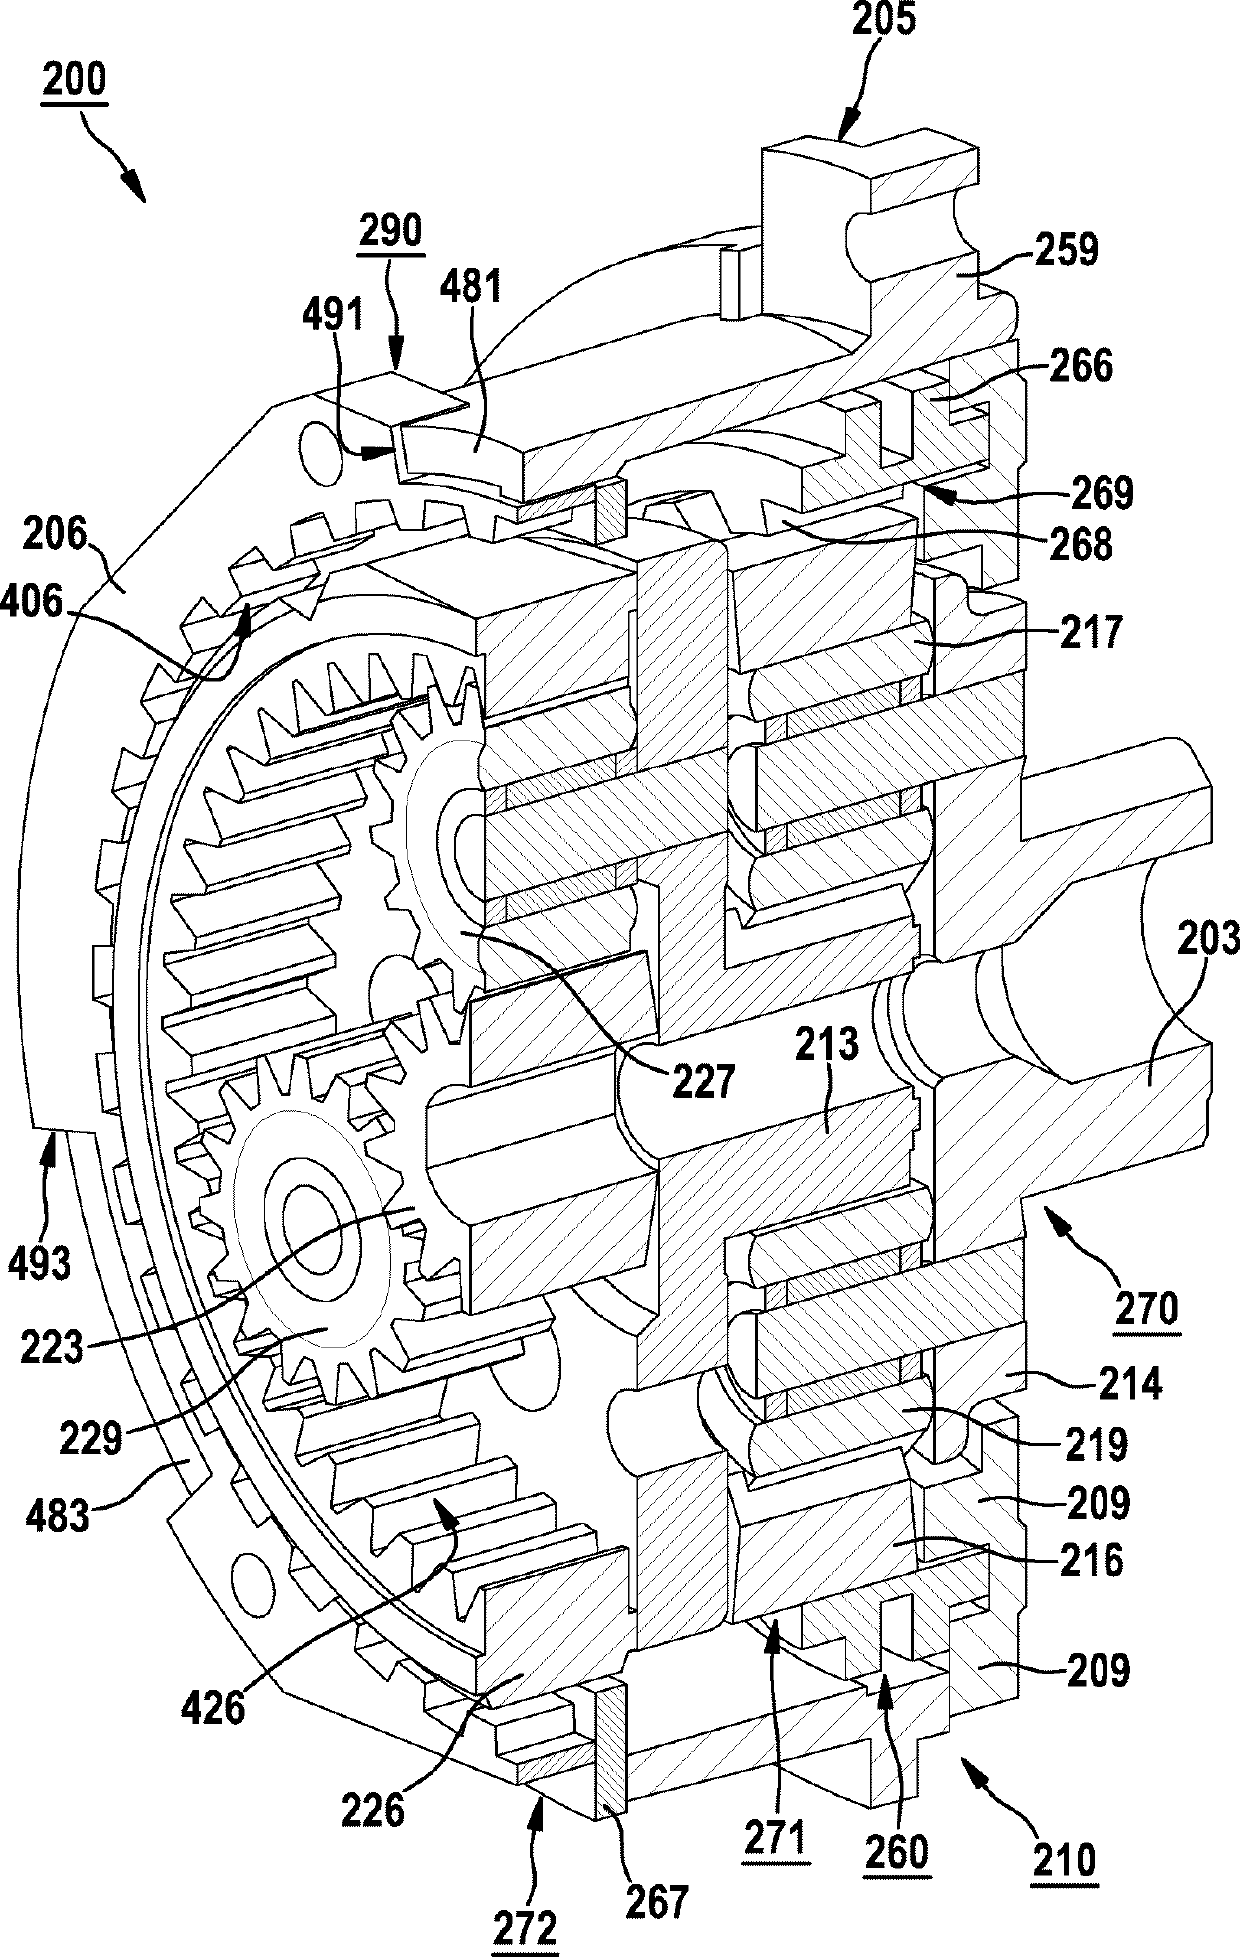 Hand-power tool with a reduction gear